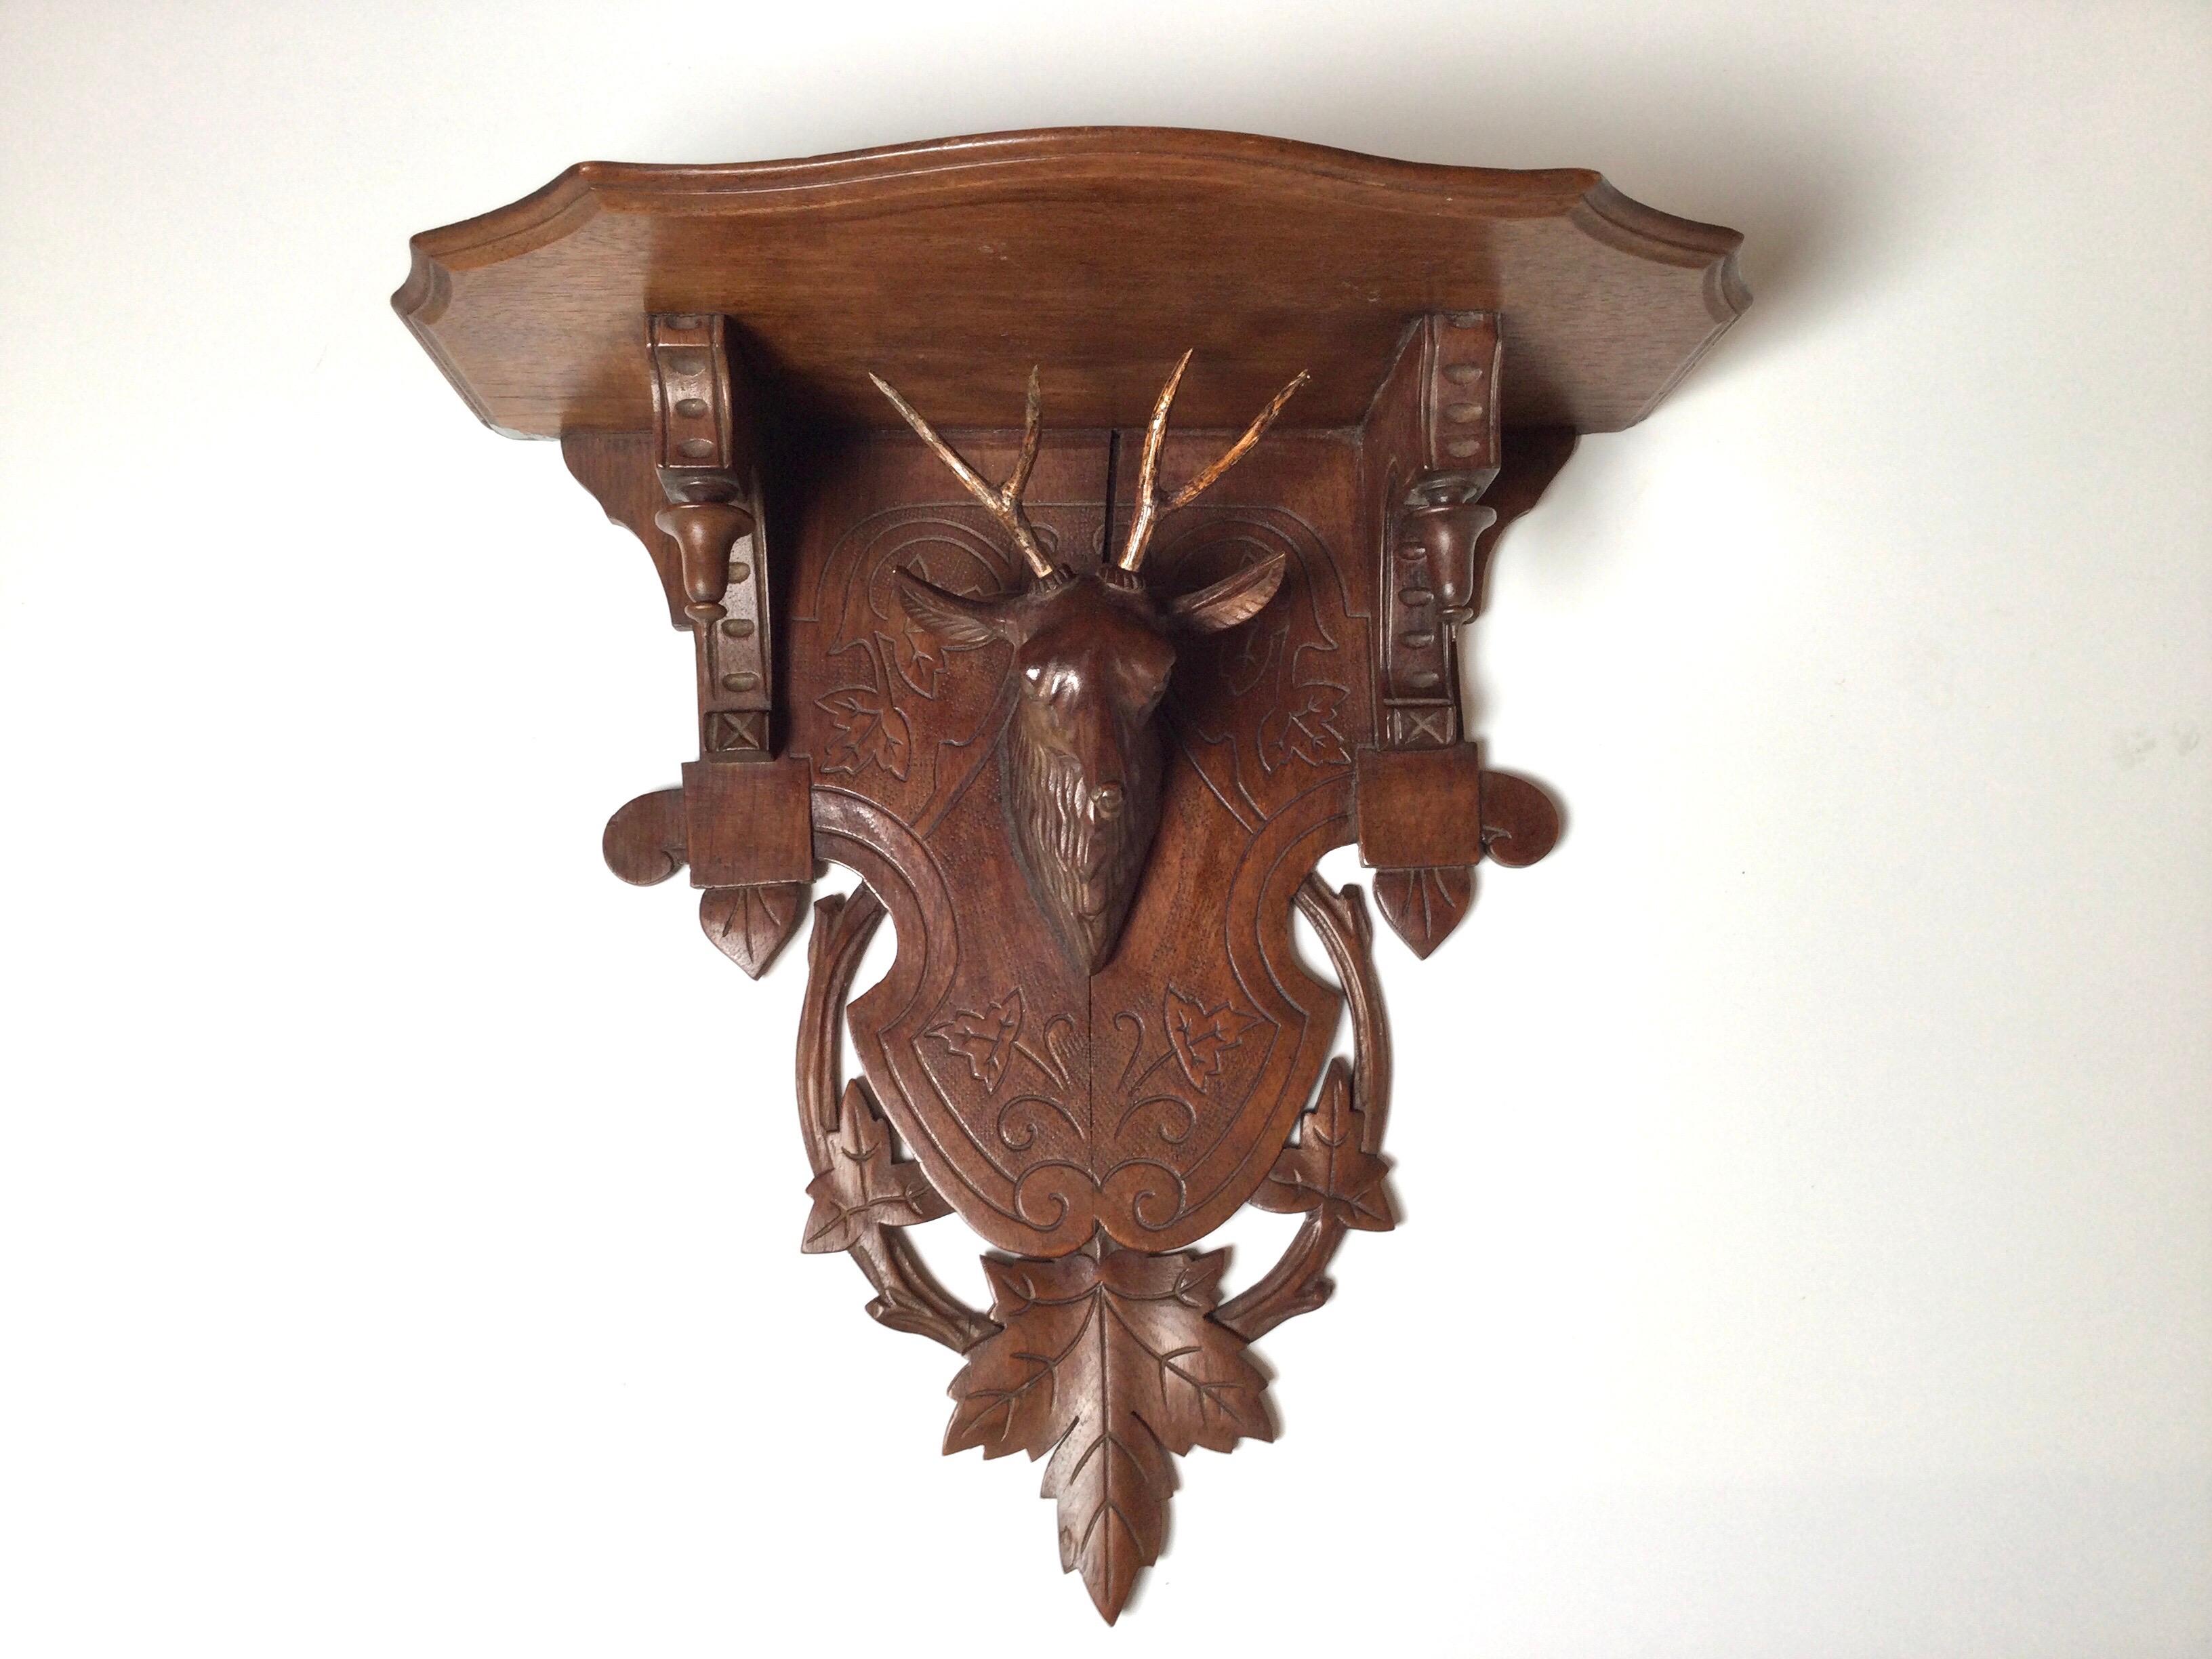 A beautifully carved Black Forrest hand carved walnut wall shelf with deer head. Austrian or German, circa 1900. Excellent condition 15 wide, 14 high, 7.5 deep.